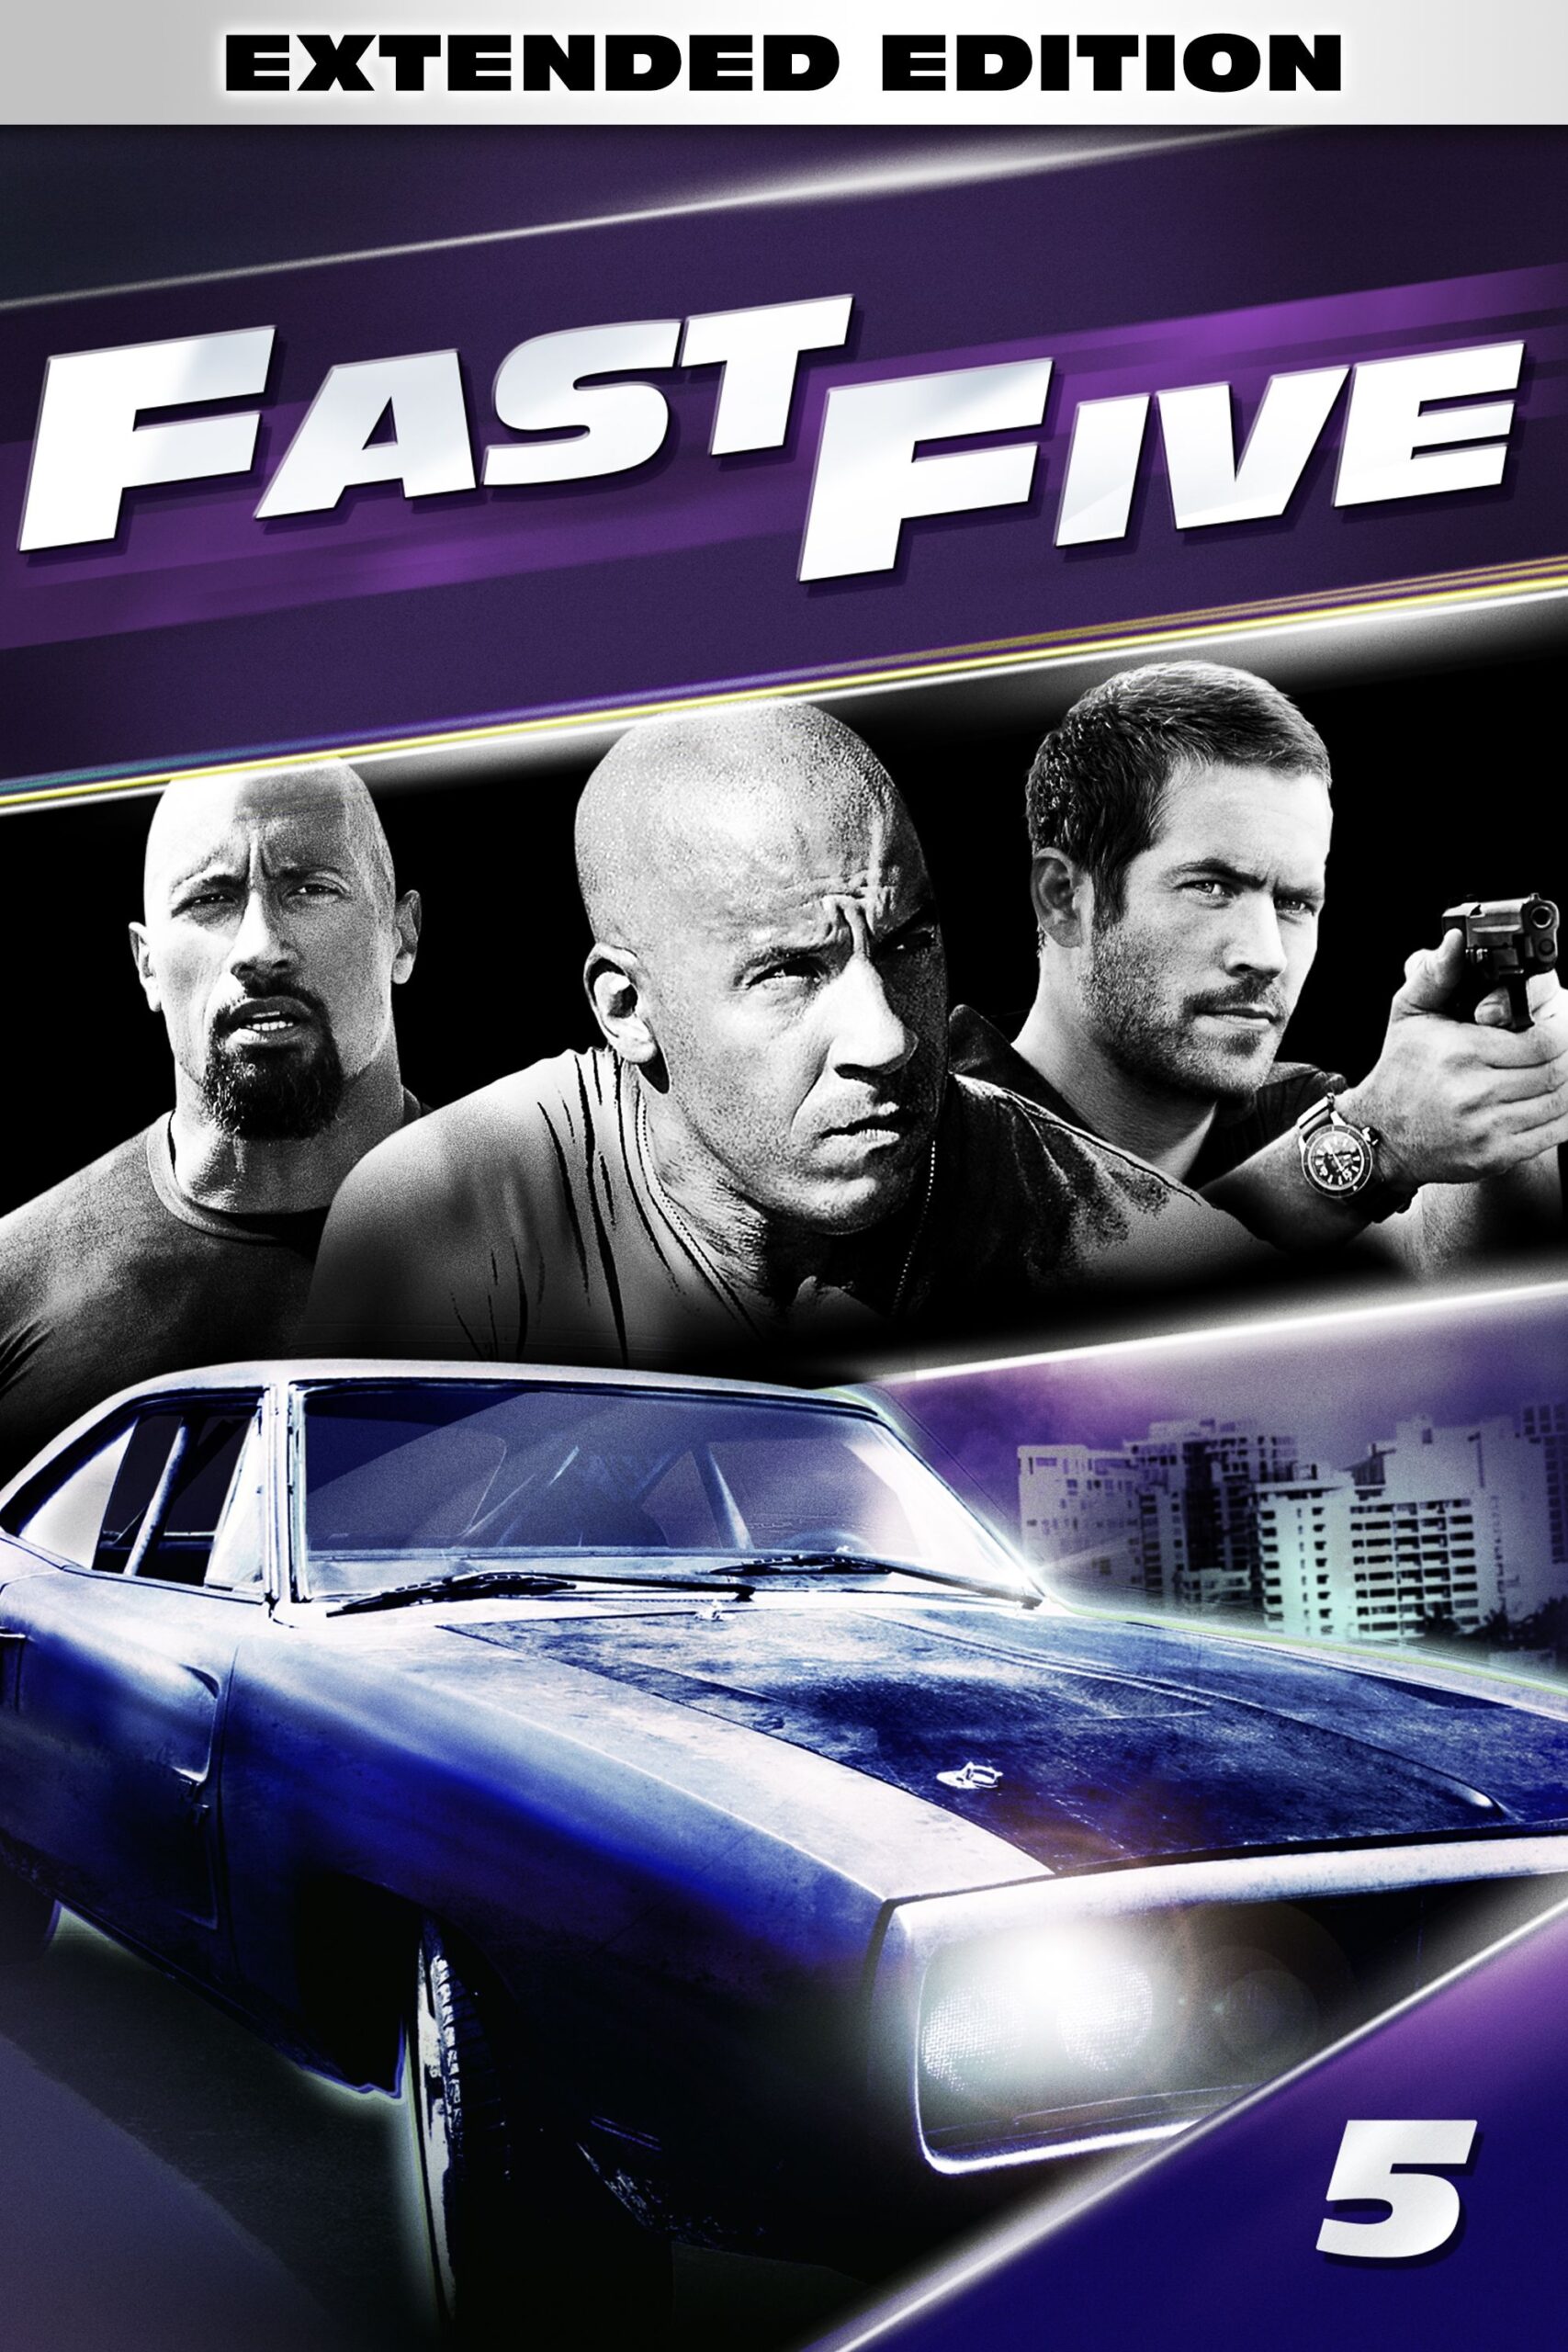 FAST 5 EXTENDED EDITION